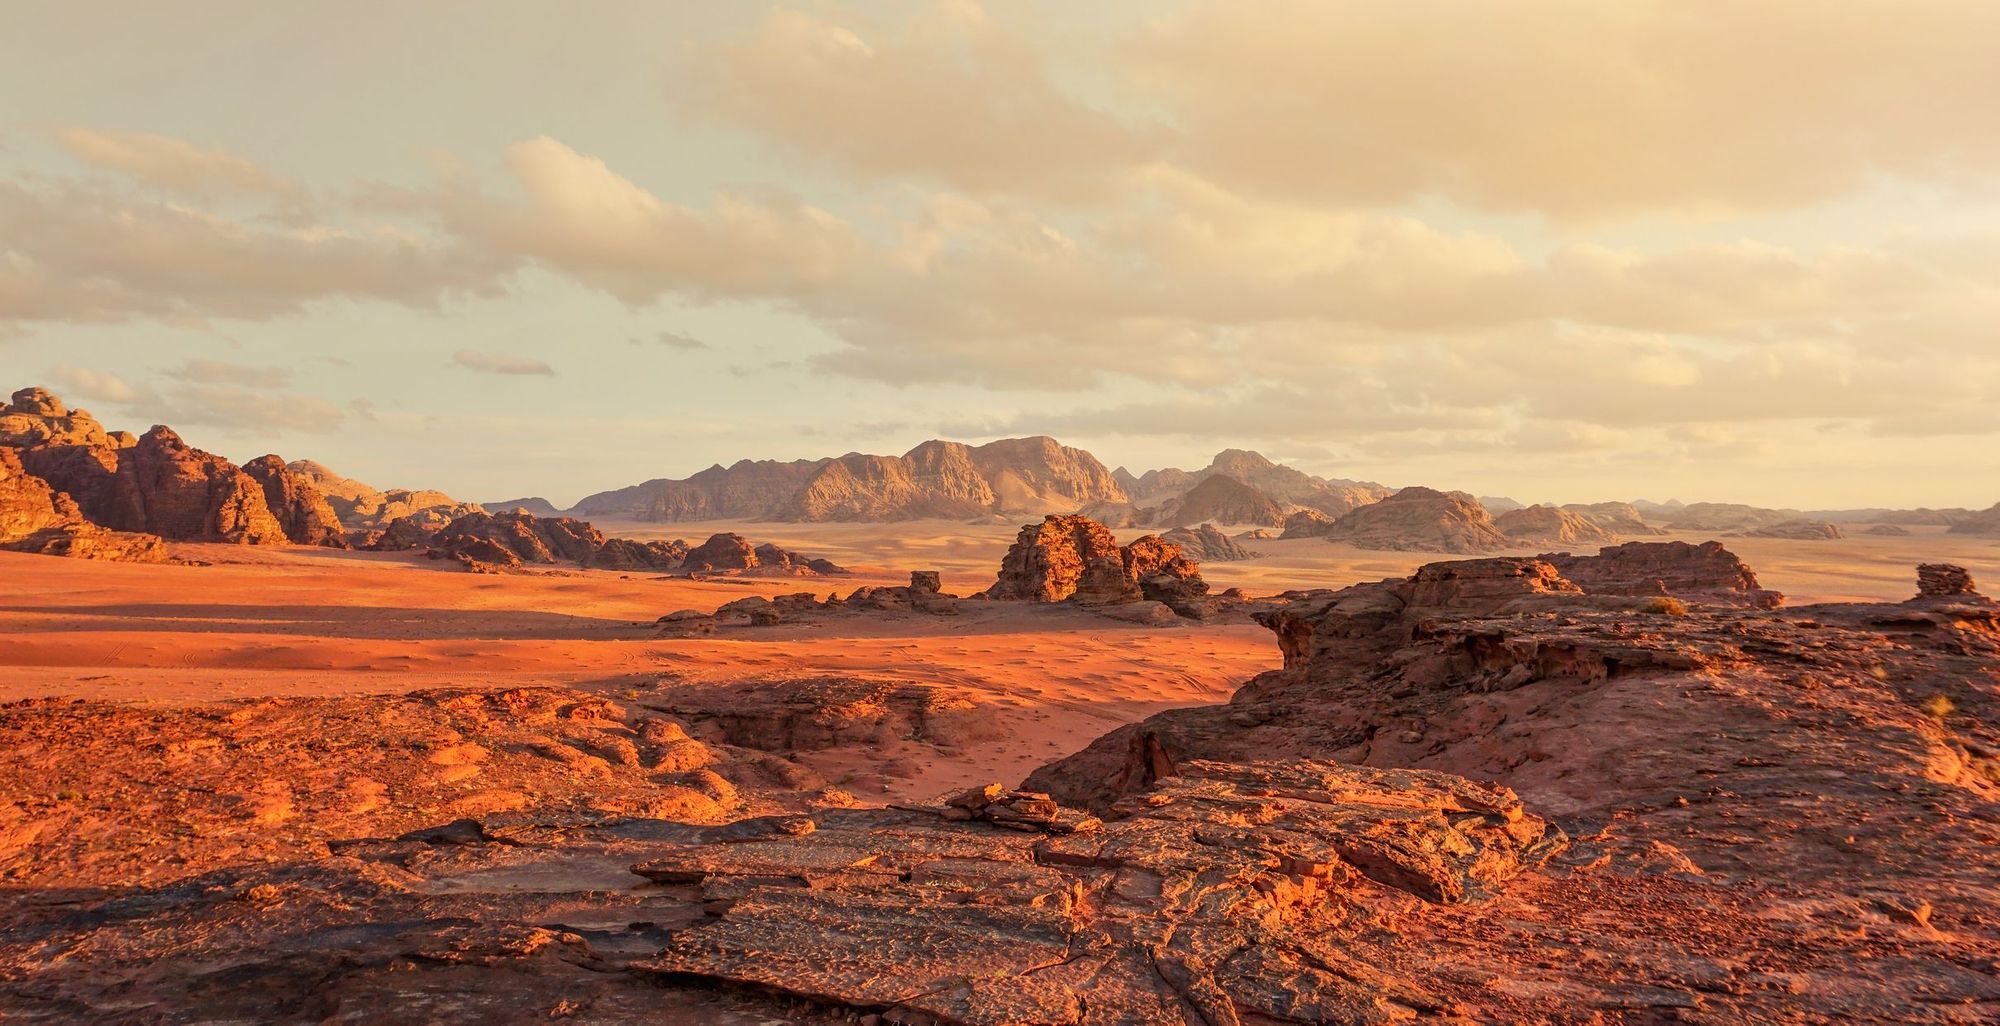 Wadi Rum, a desert in Jordan characterised by its red sand. Photo: Getty.